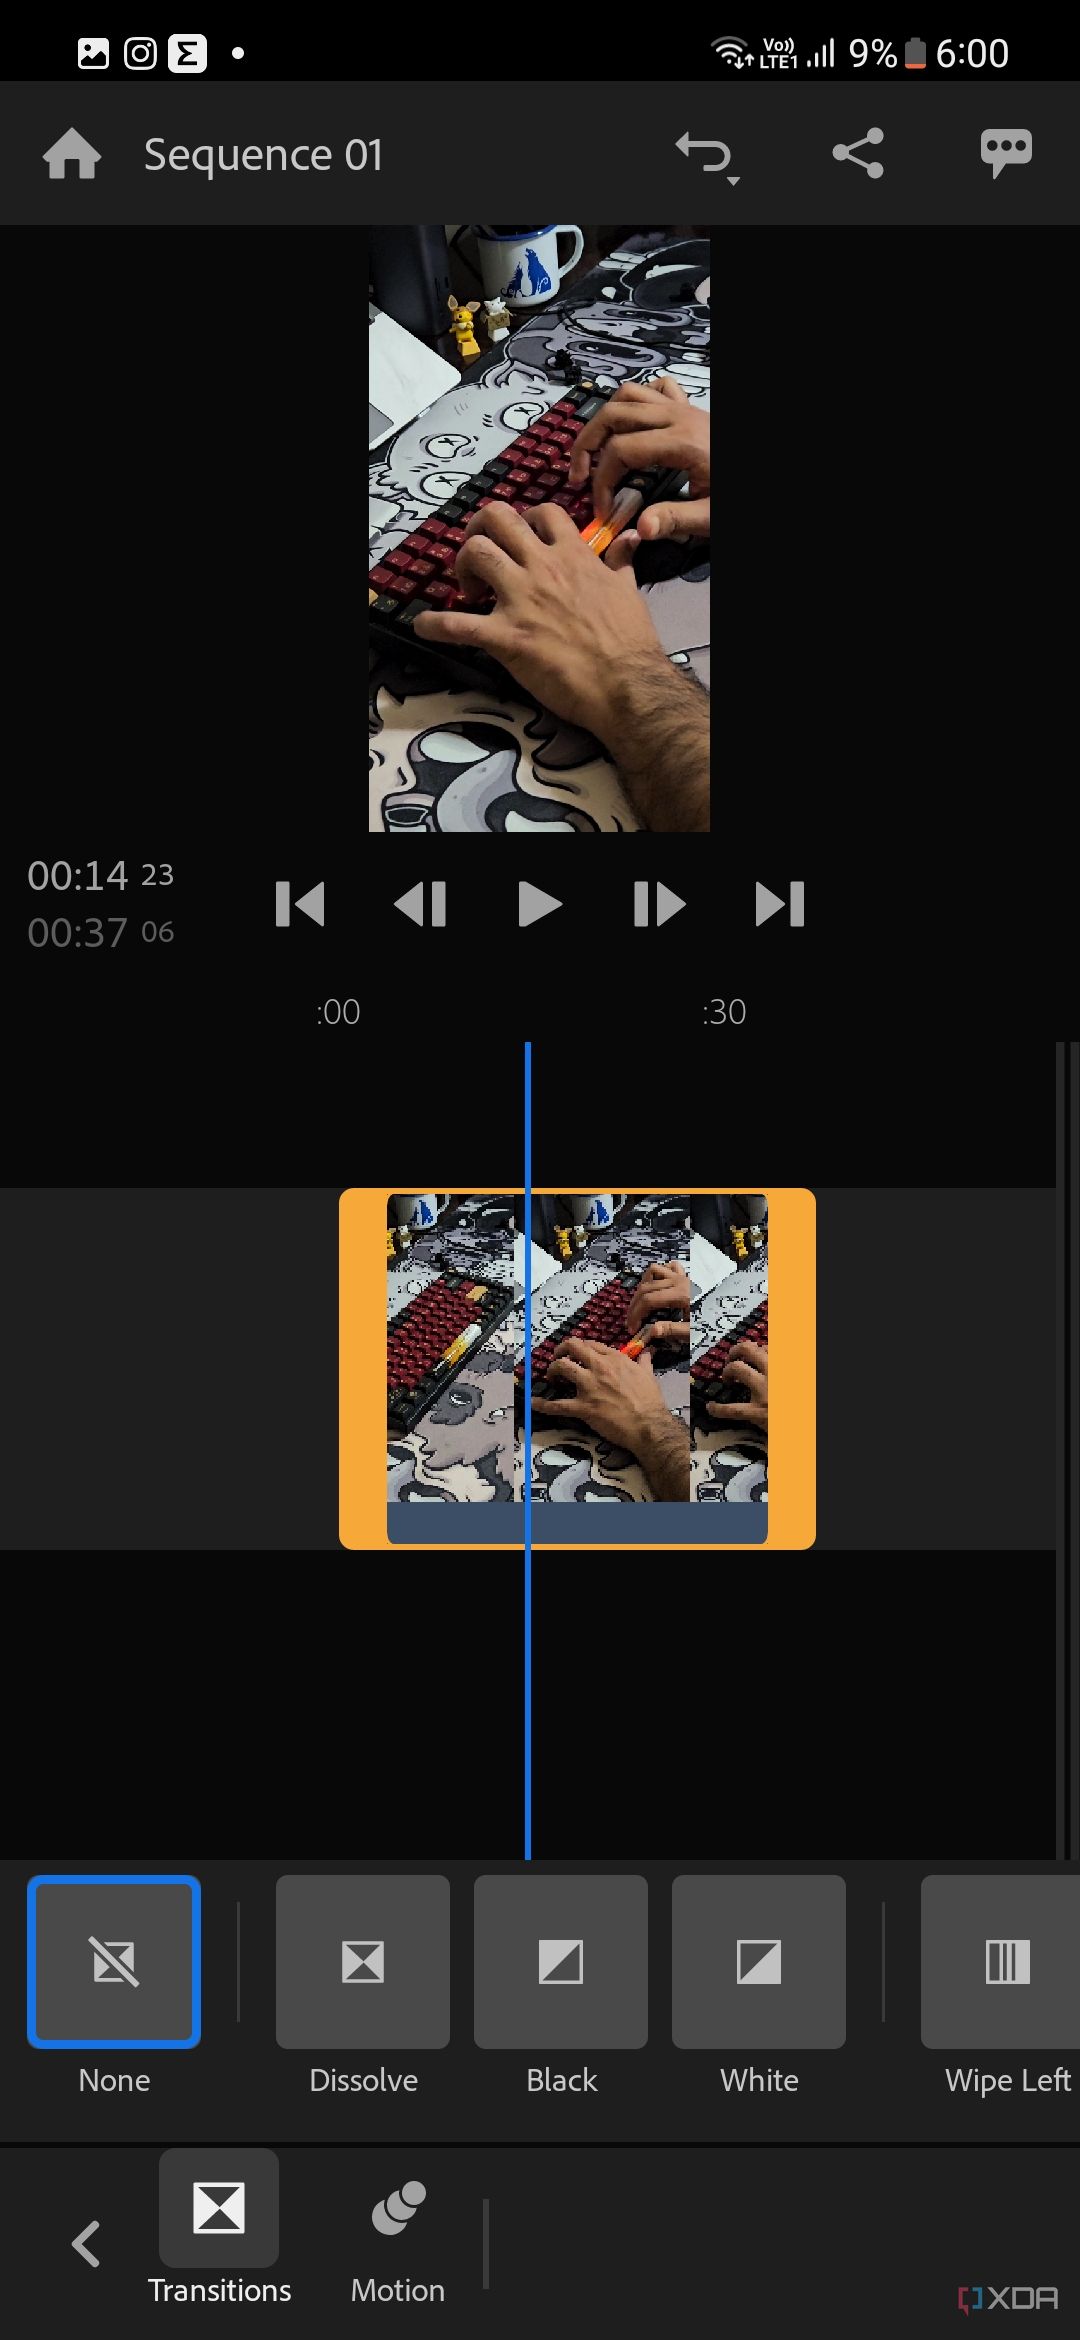 A screenshot captured on the Galaxy S23 showing the effects menu in Adobe Premiere Rush app.